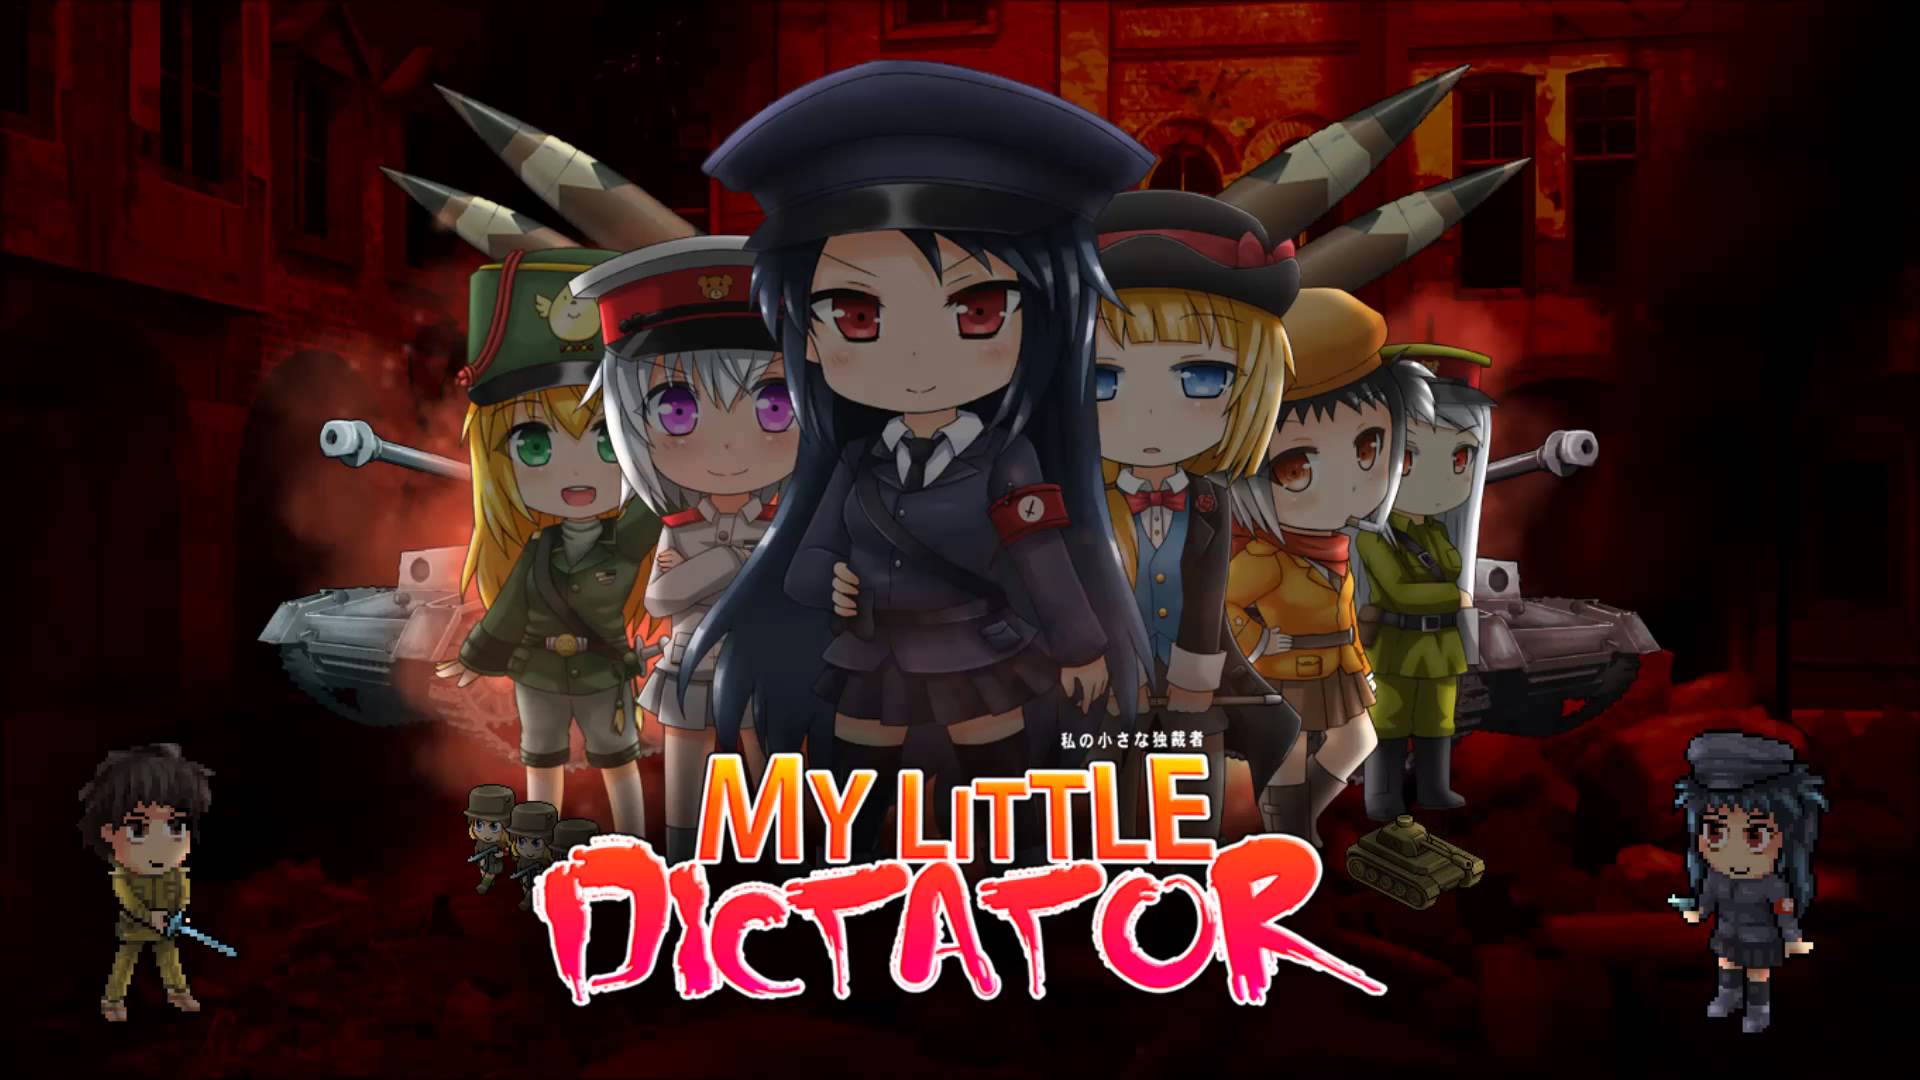 HD Quality Wallpaper | Collection: Anime, 1920x1080 My Little Dictator